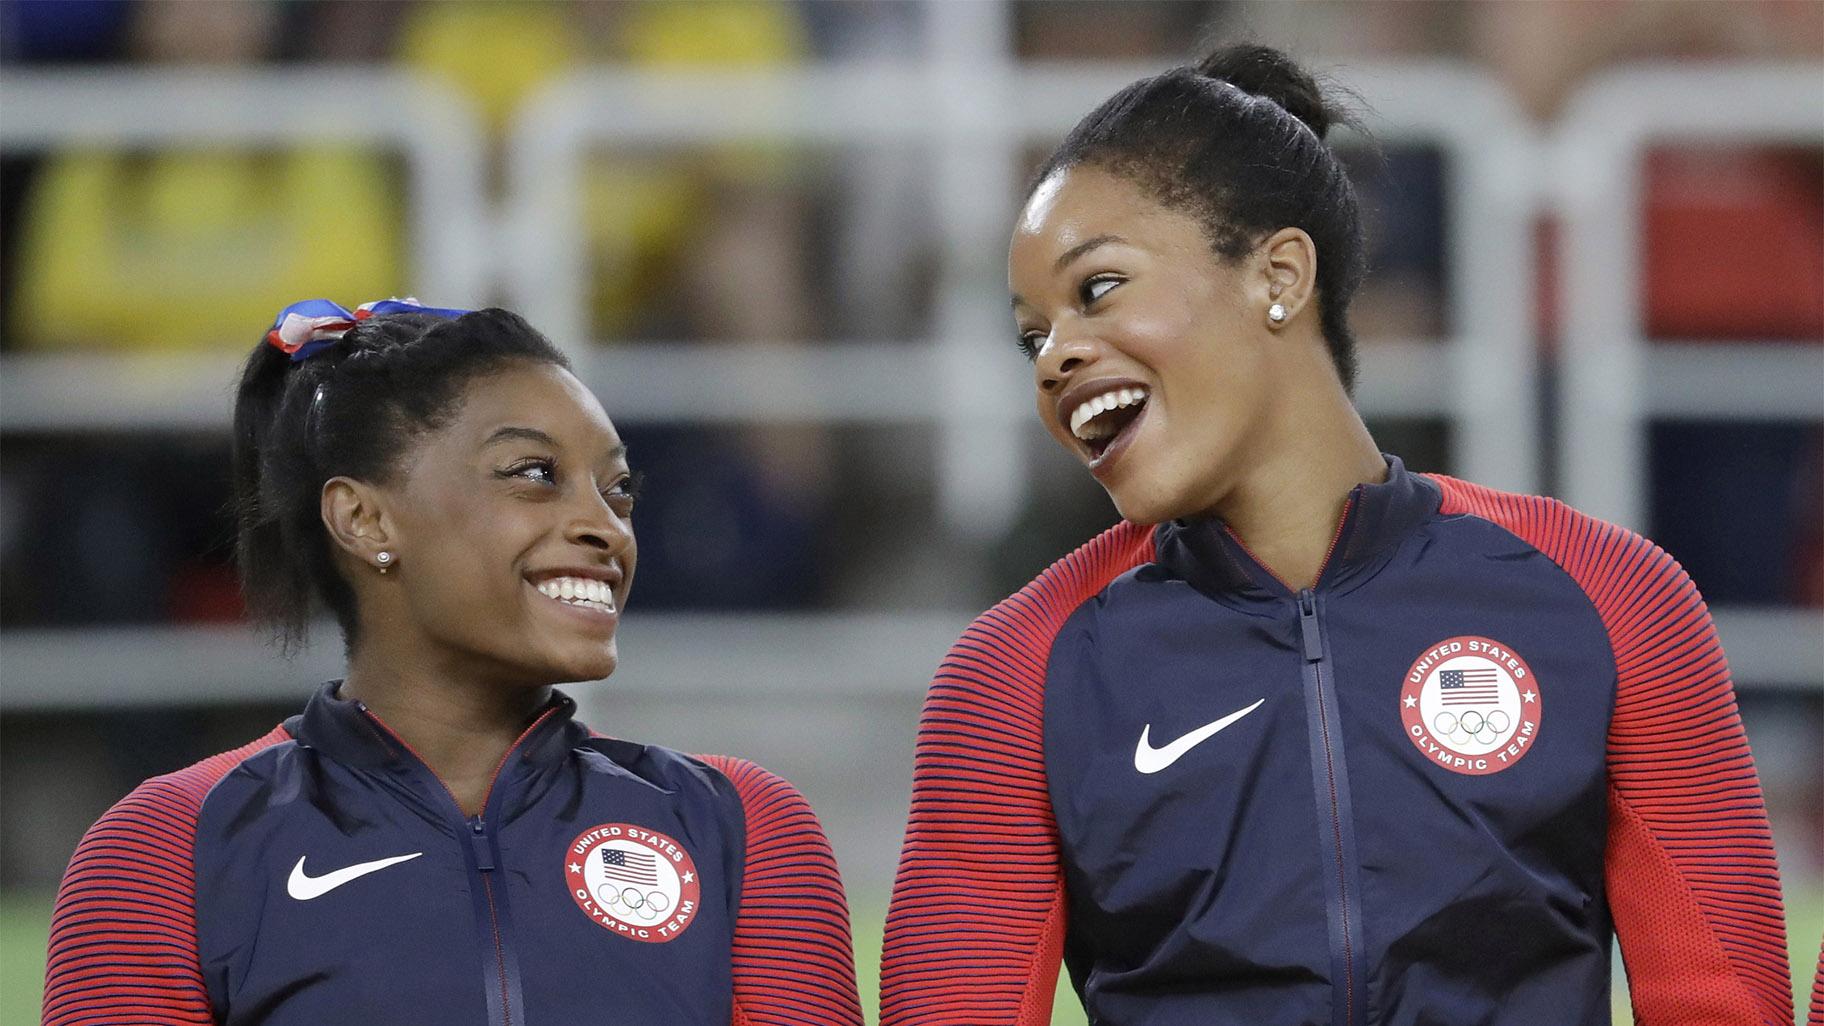 In this Aug. 9, 2016, file photo, U.S. gymnasts and gold medallists, Simone Biles, left and Gabrielle Douglas celebrate on the podium during the medal ceremony for the artistic gymnastics women's team at the 2016 Summer Olympics in Rio de Janeiro, Brazil. (AP Photo / Julio Cortez, File)